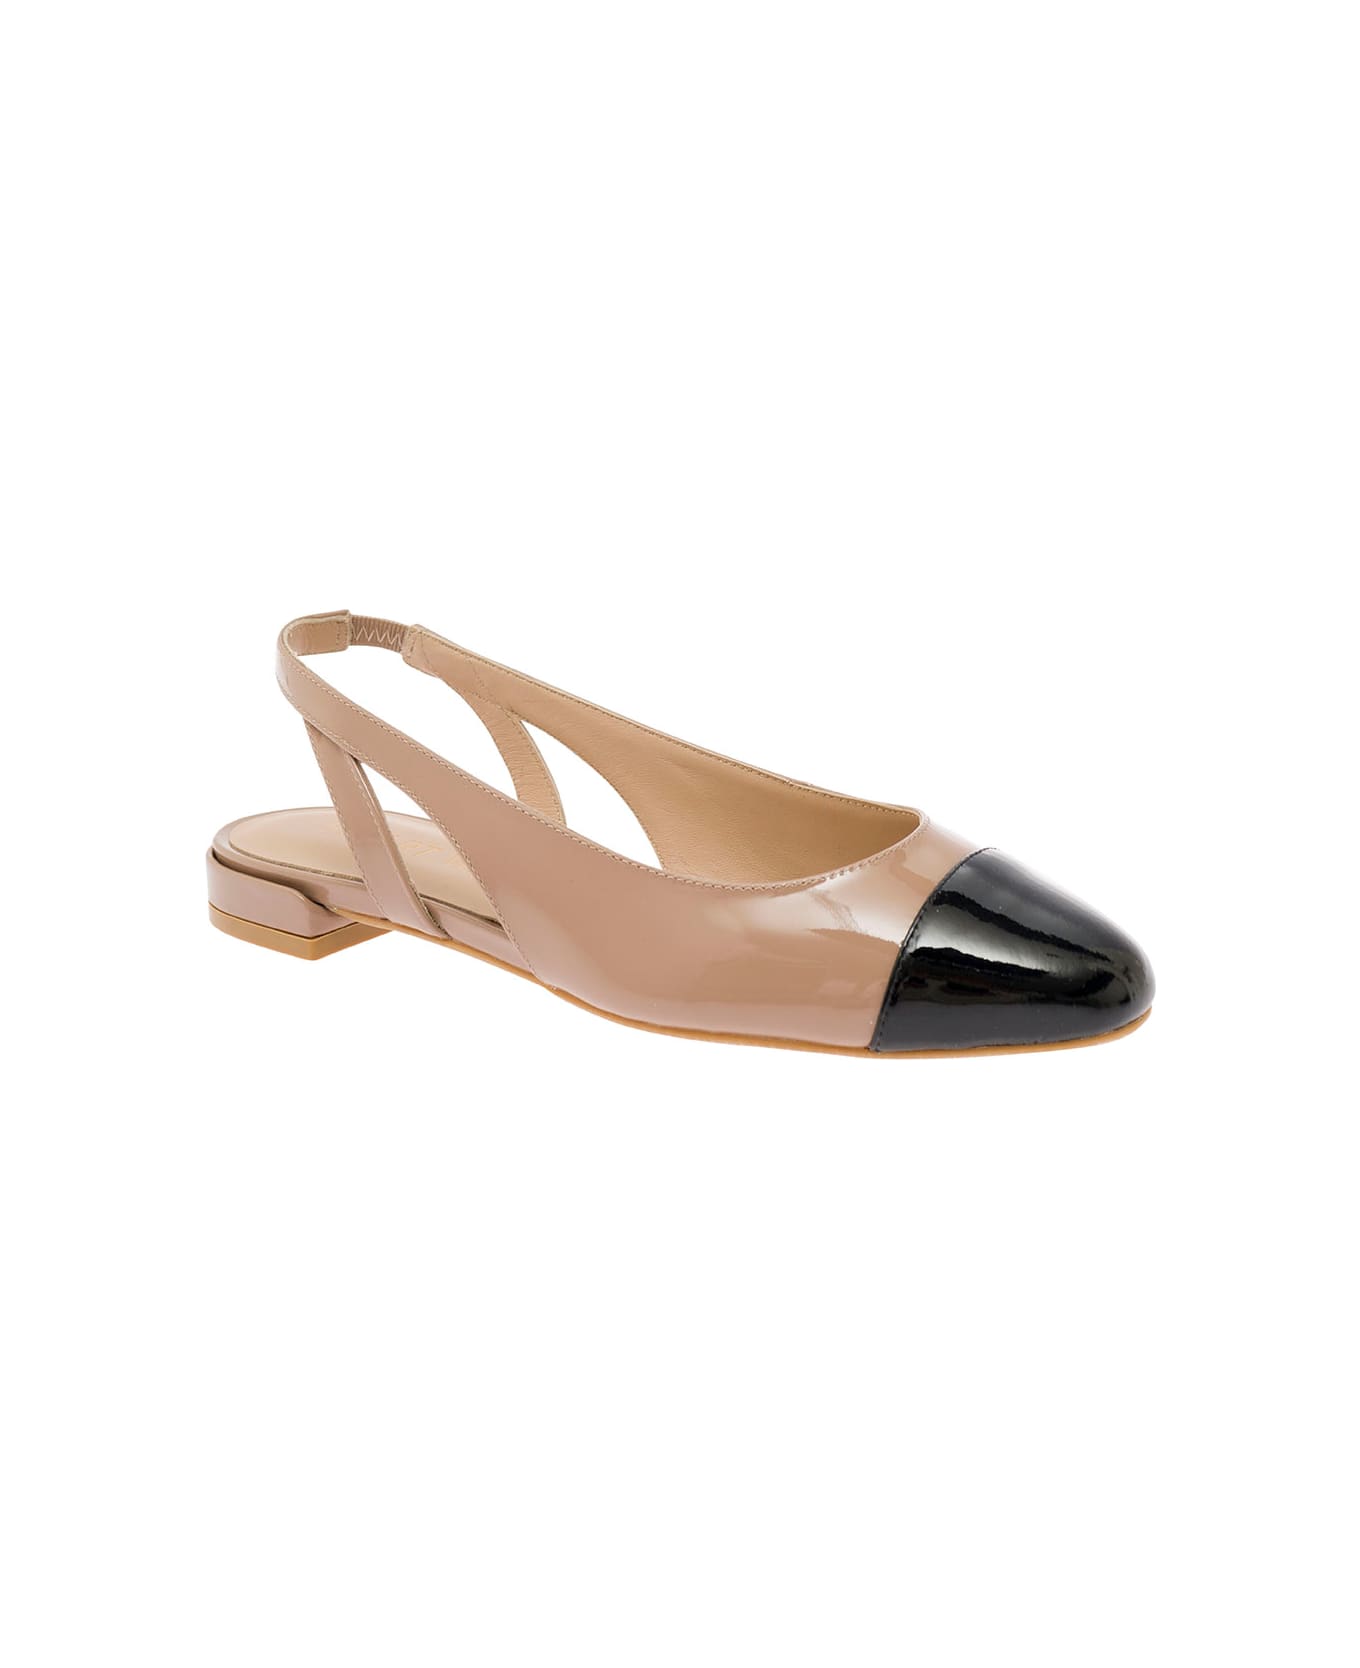 Stuart Weitzman Beige Slingback Mules With Contrasting Toe Cap In Patent Leather Woman - Black フラットシューズ